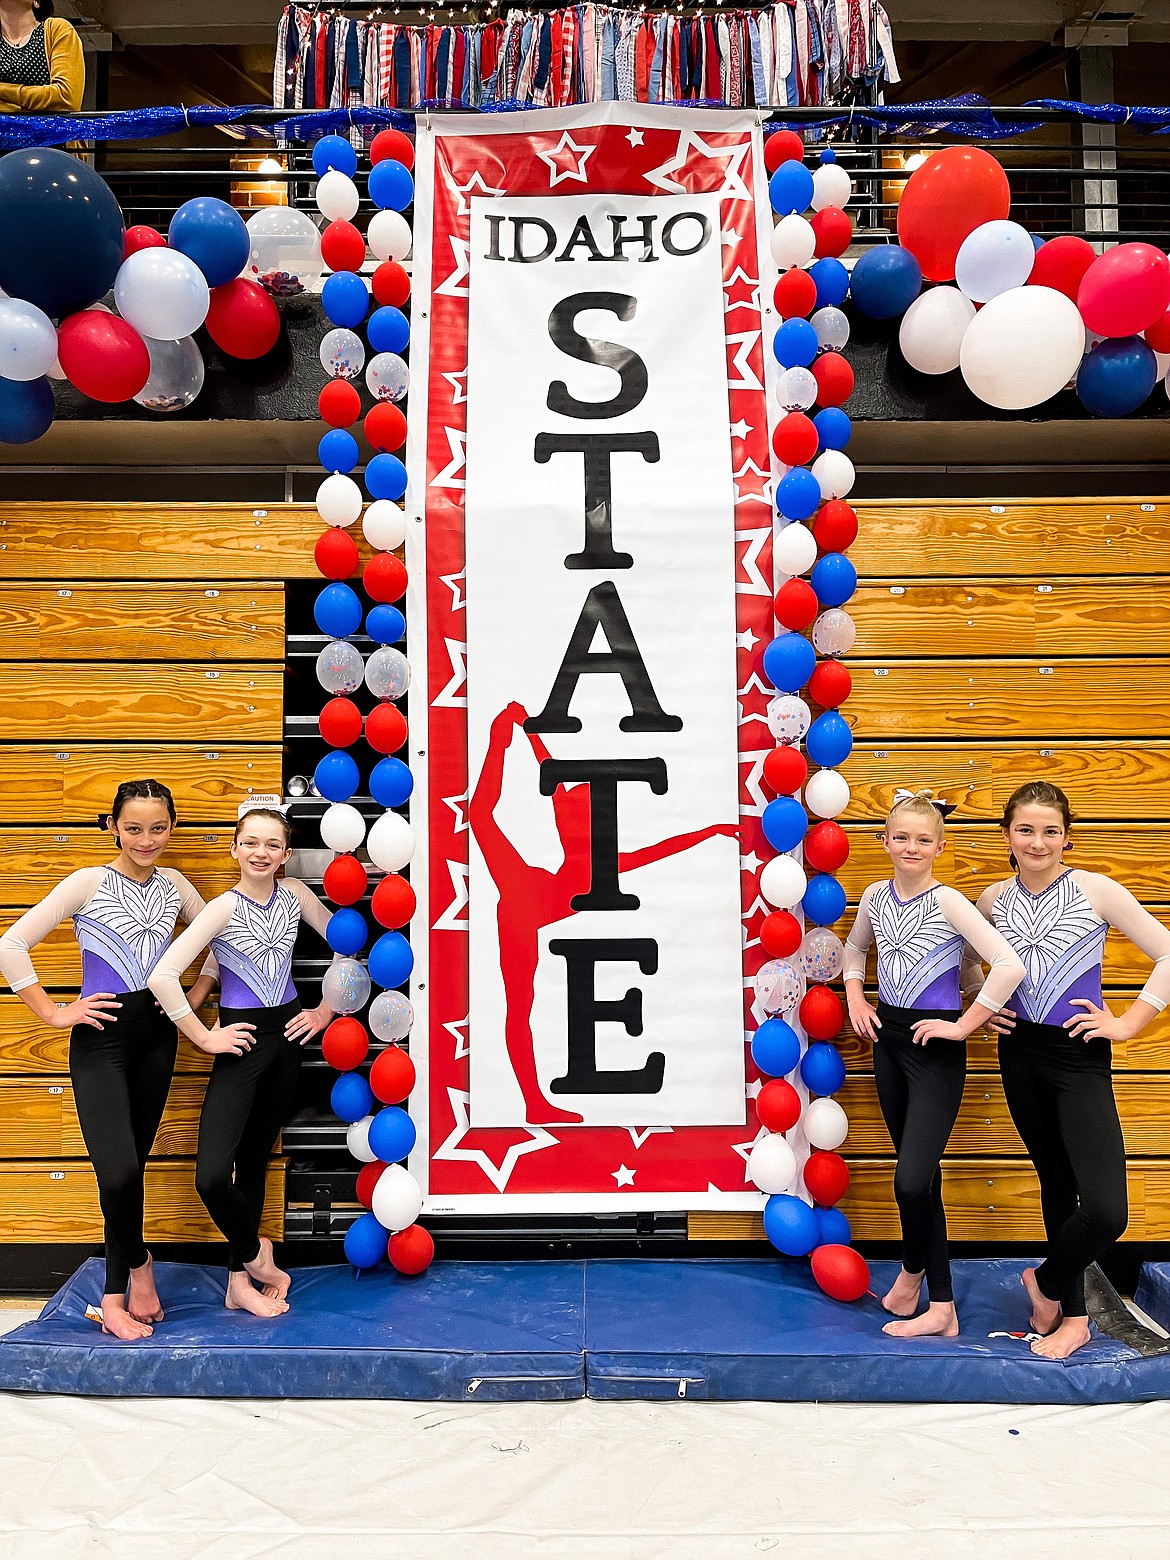 Courtesy photo
Avant Coeur Xcel Silvers at the Idaho state gymnastics championships in Moscow. From left are Malia Makanani, Mallory Secord, Harlan Baldwin and Myla Bryan.